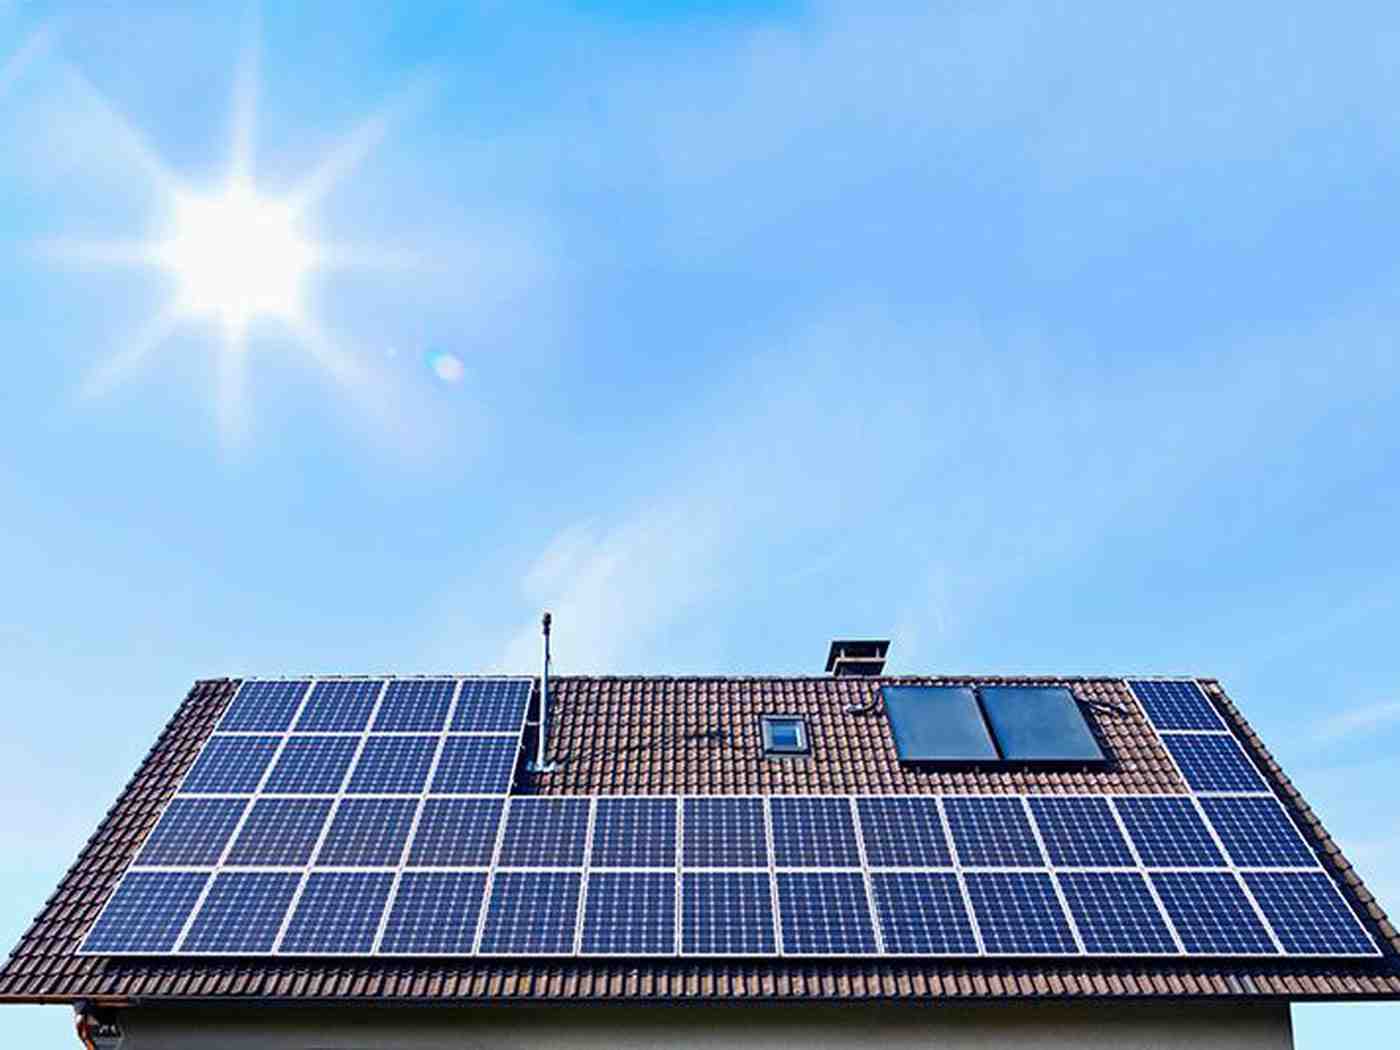 Is solar energy used widely?